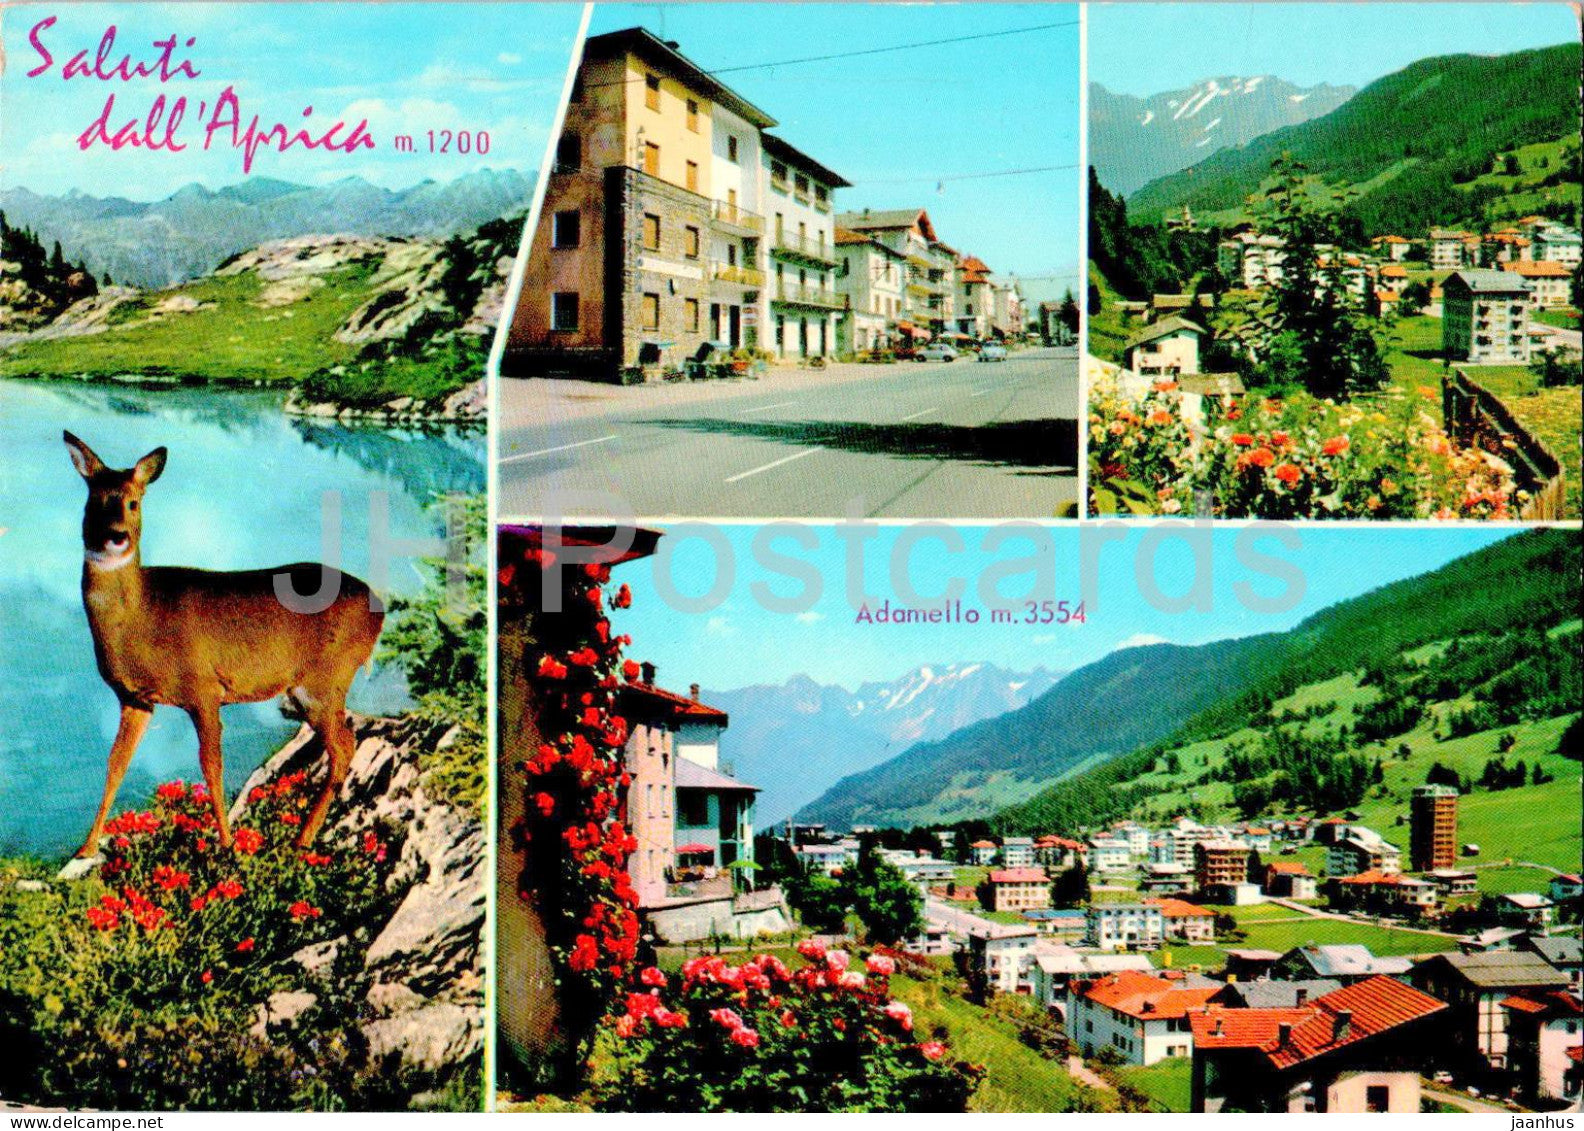 Saluti dall'Aprica 1200 m - Adamello - deer - animals - multiview - 0255 - Italy - used - JH Postcards